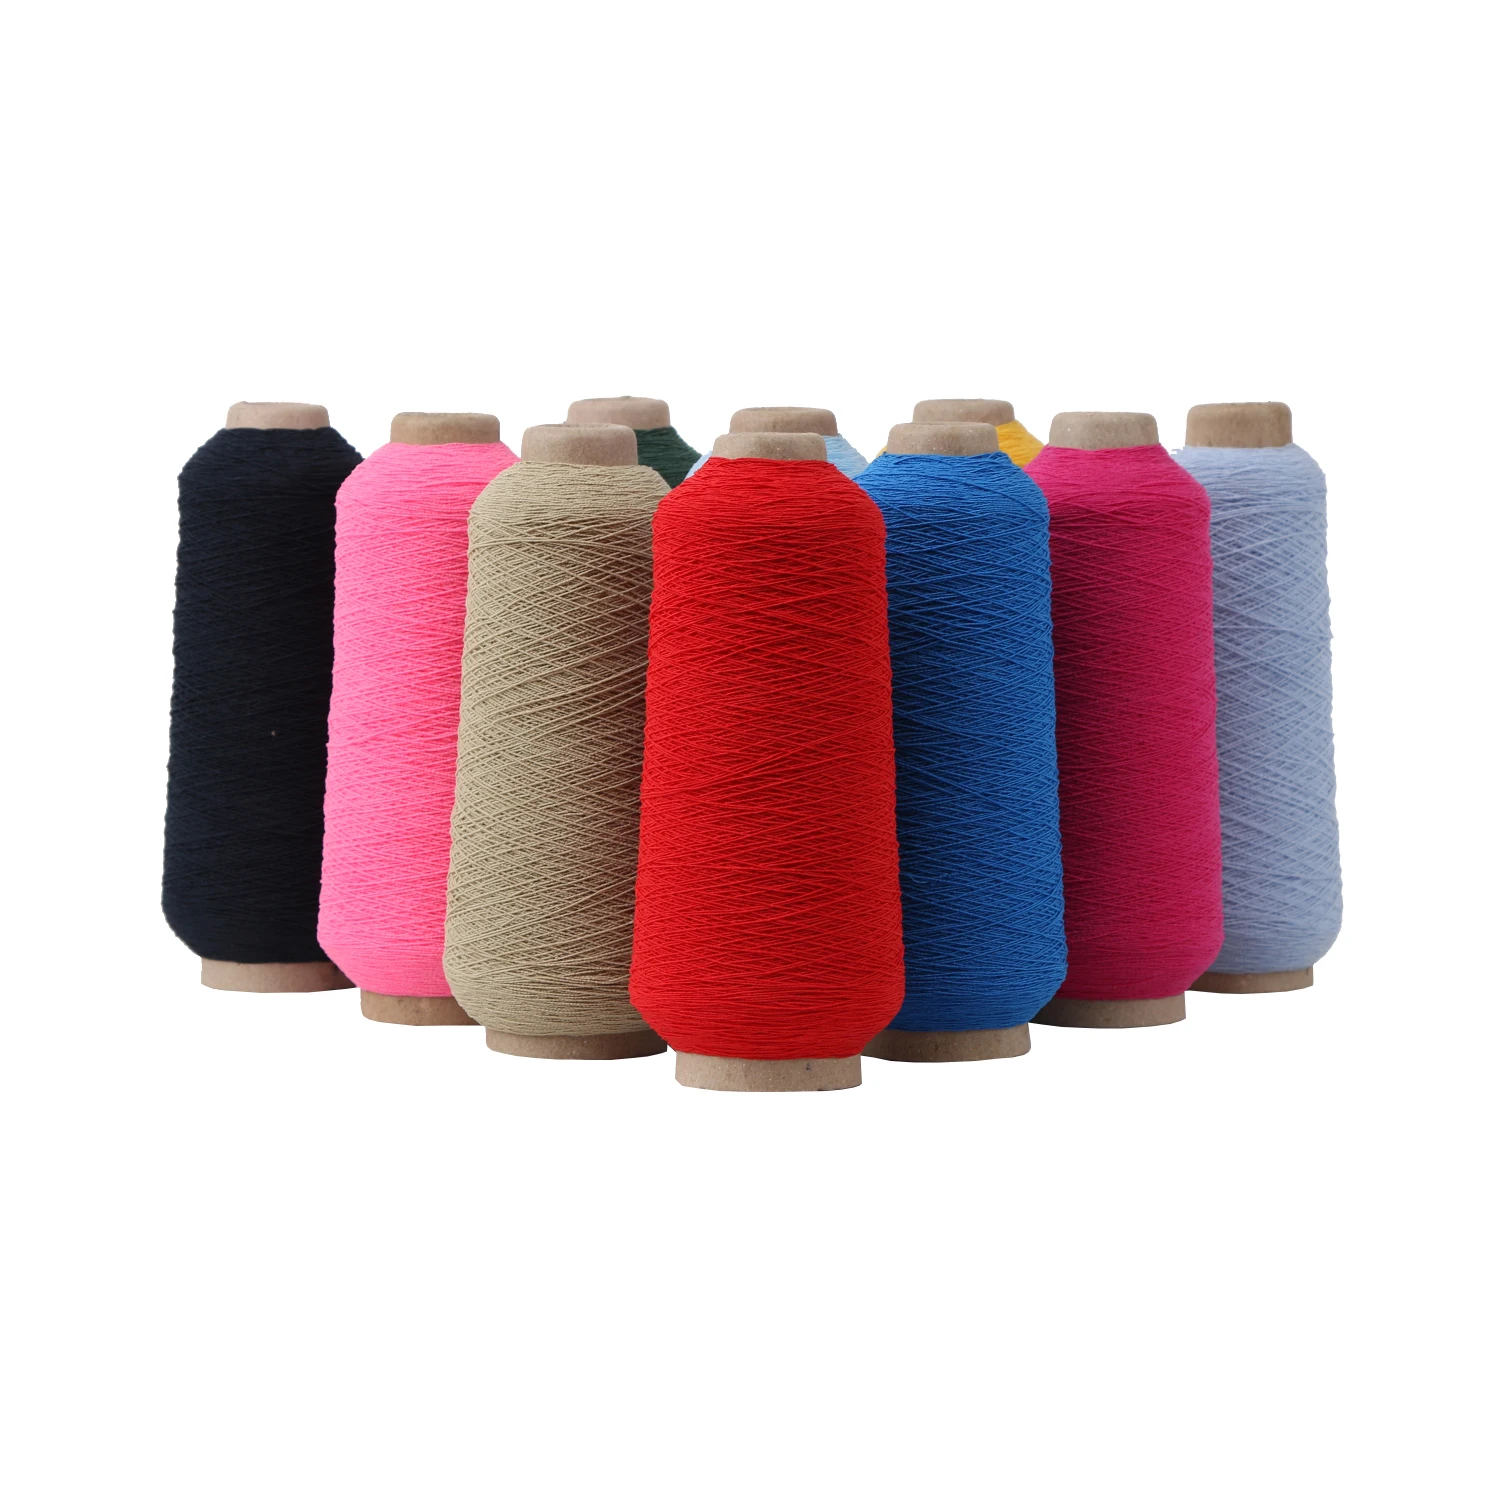 90# 100# 110# Nylon Rubber Covered Yarn Covering Rubber Yarn High Elastic Rubber Latex Double Covered Yarn